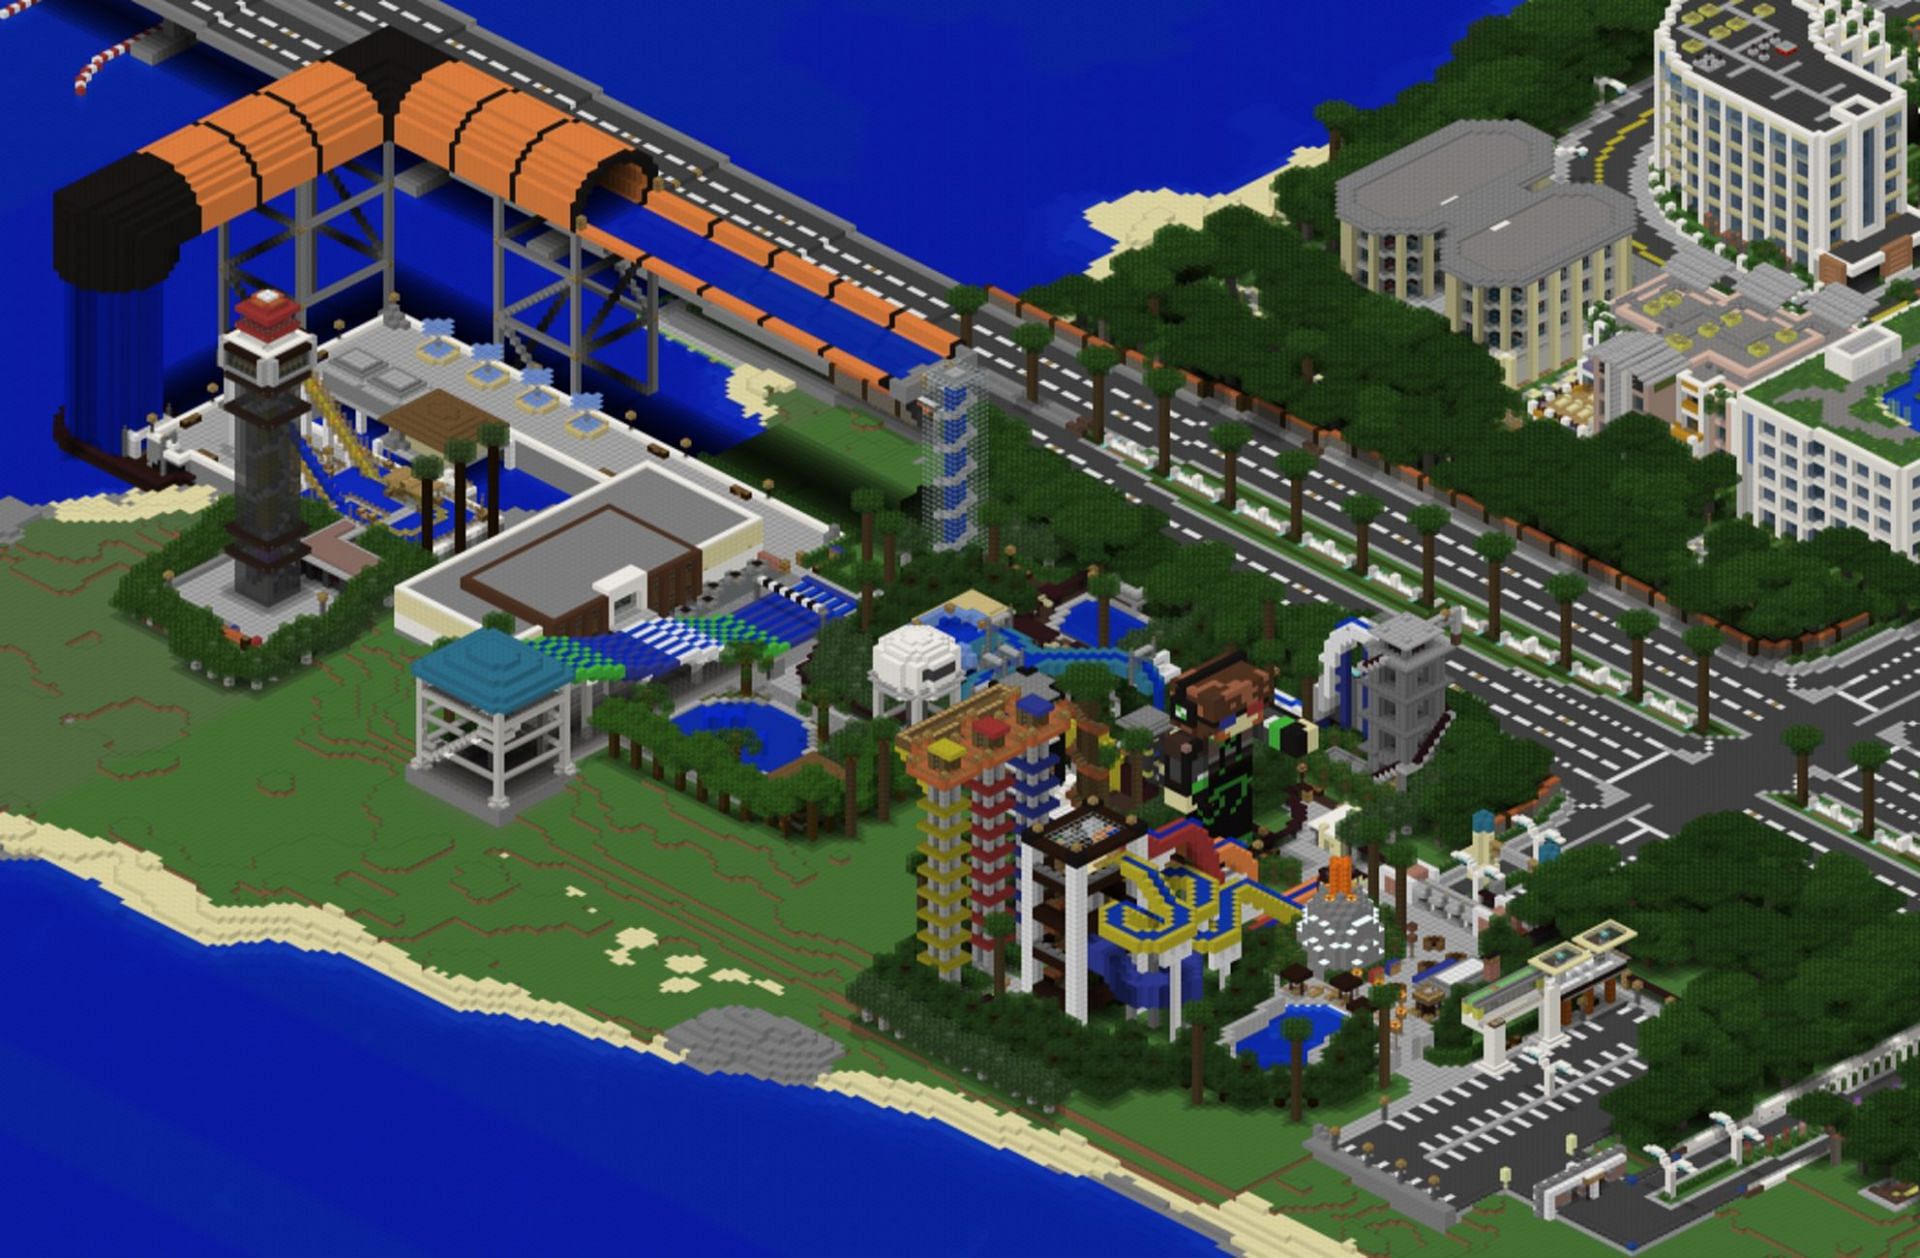 The size of this water park is astonishing (Image via TheTekkitRealm/PlanetMinecraft)